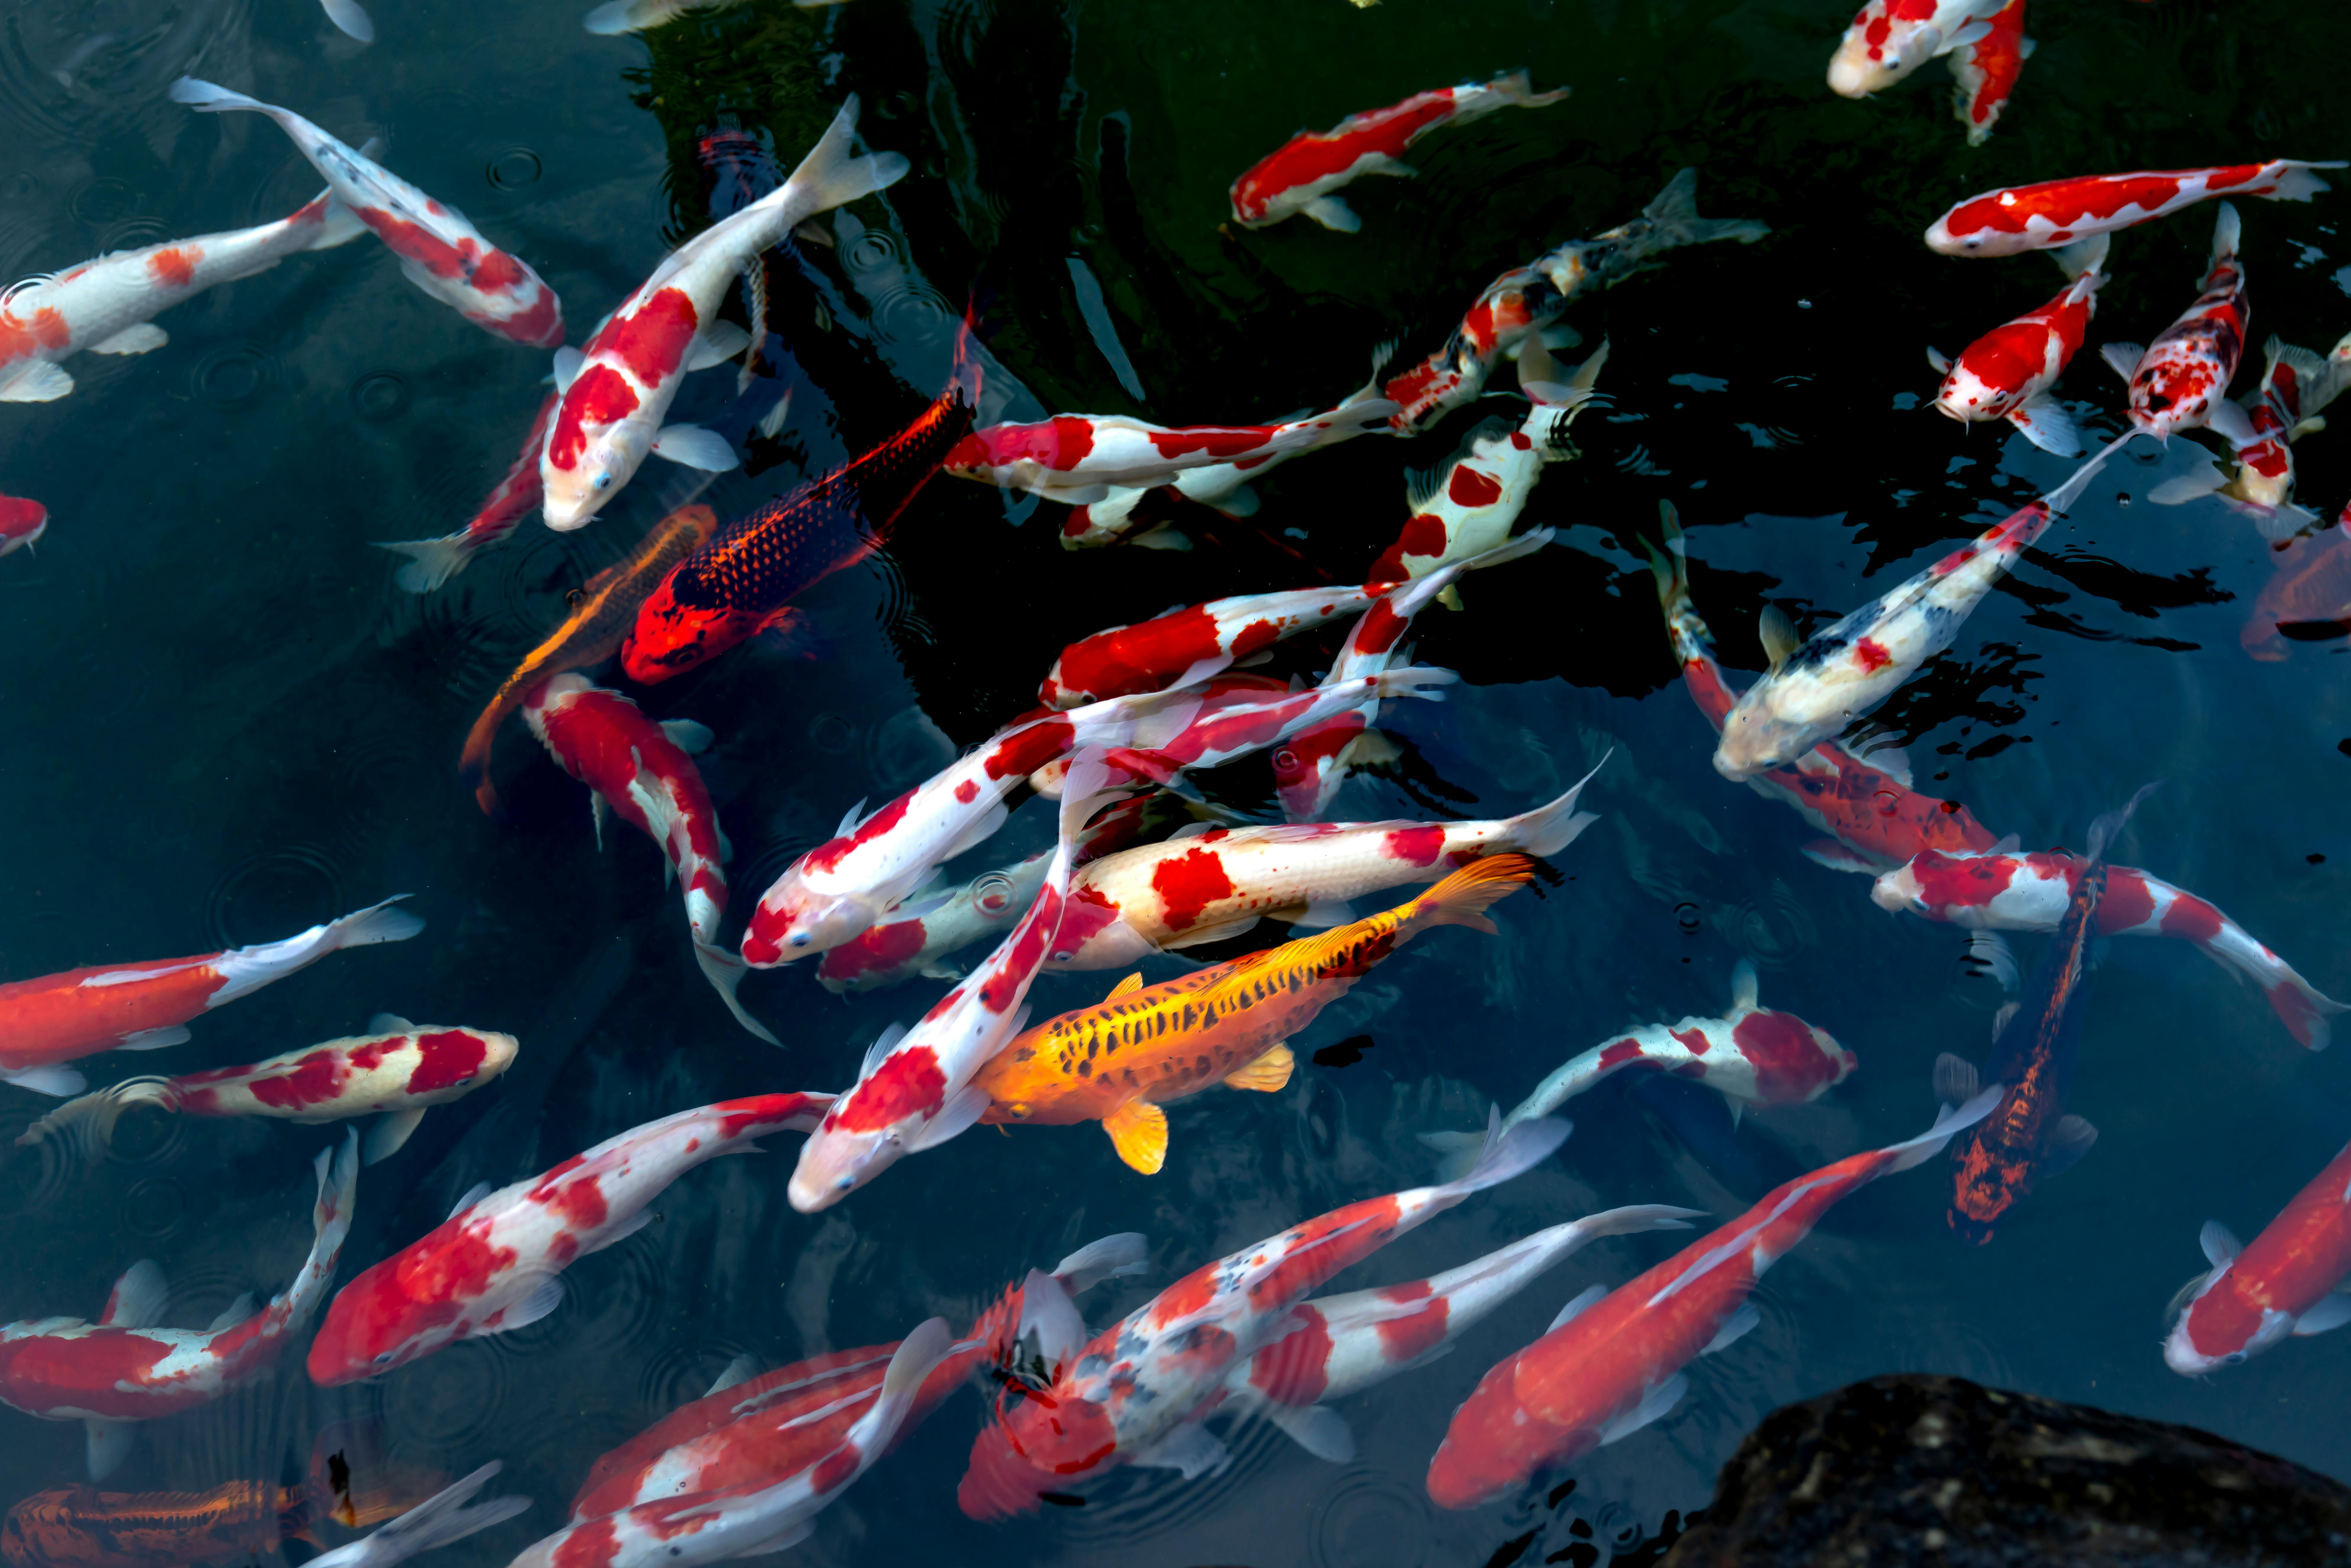 Download wallpaper 1920x1080 koi carp fish tail fins water under  water bubbles full hd hdtv fhd 1080p hd background